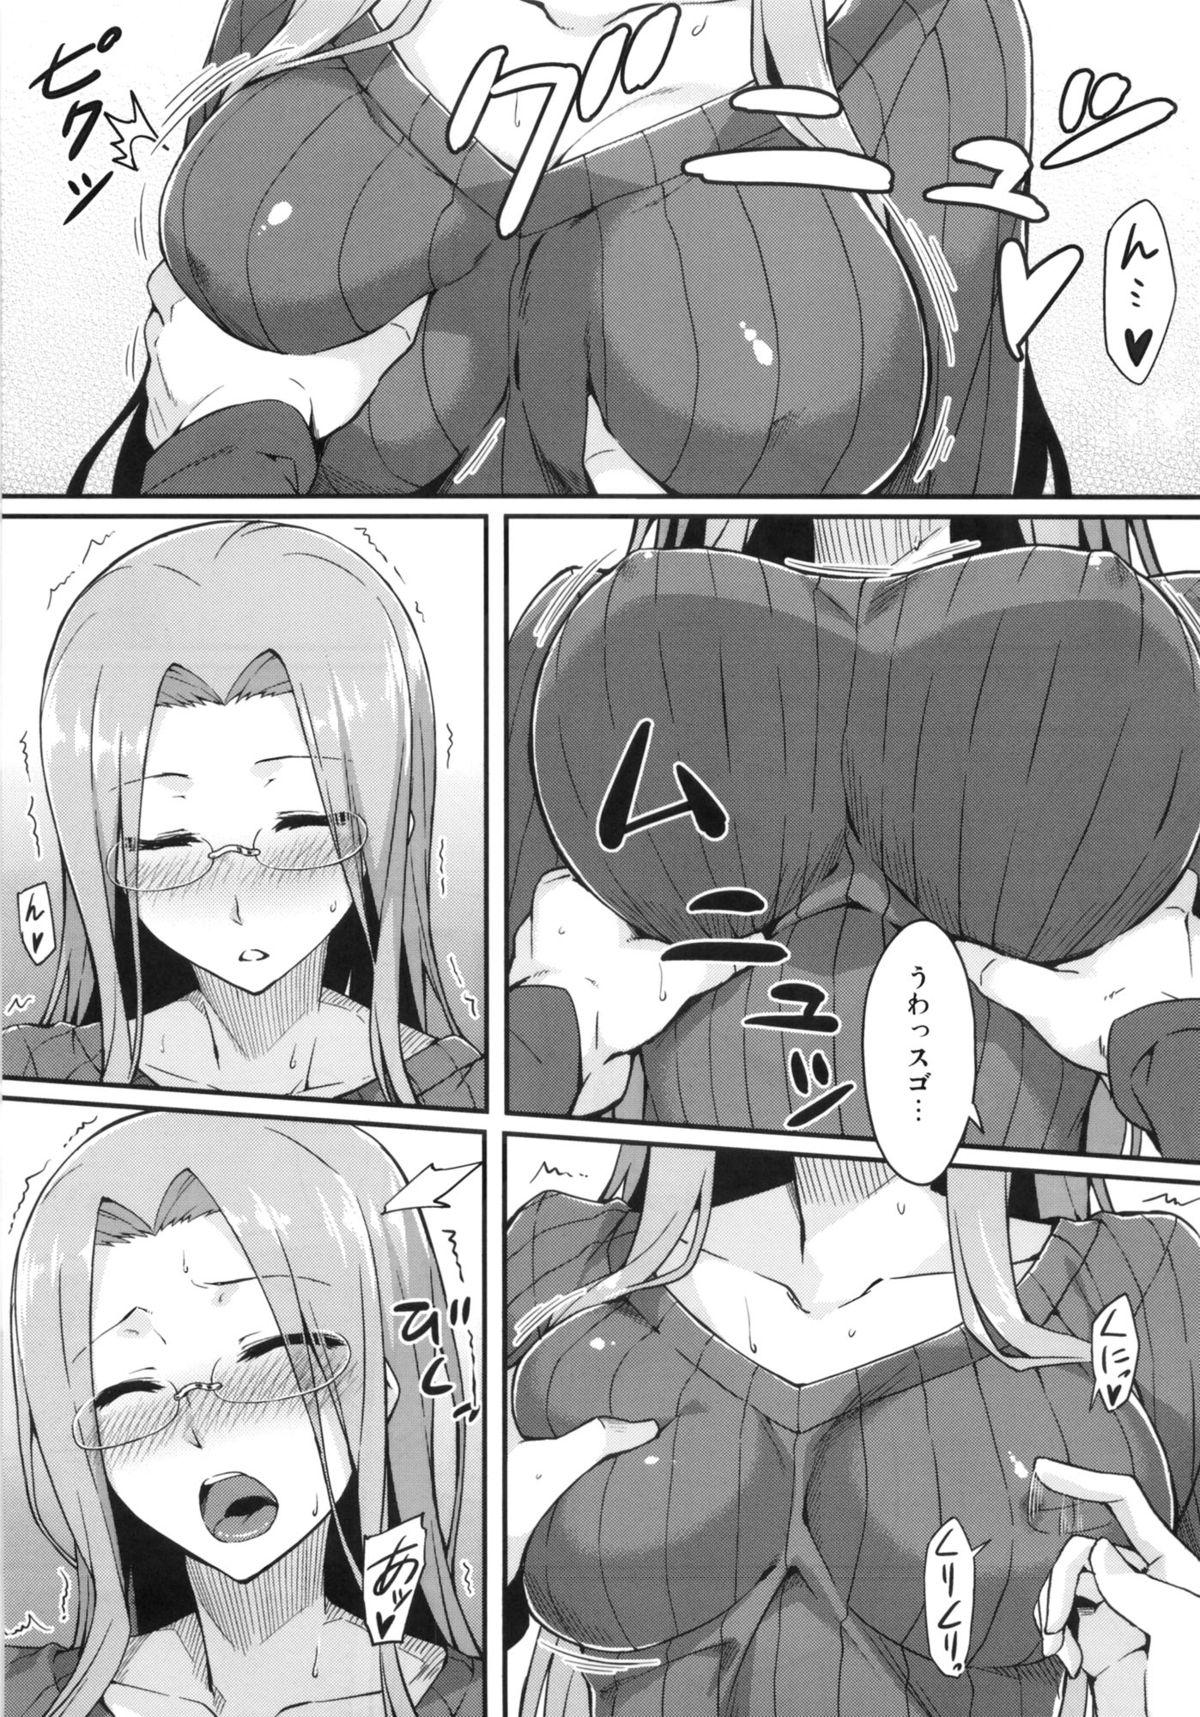 Peeing Rider-san to Tate Sweater. - Fate hollow ataraxia Massages - Page 6